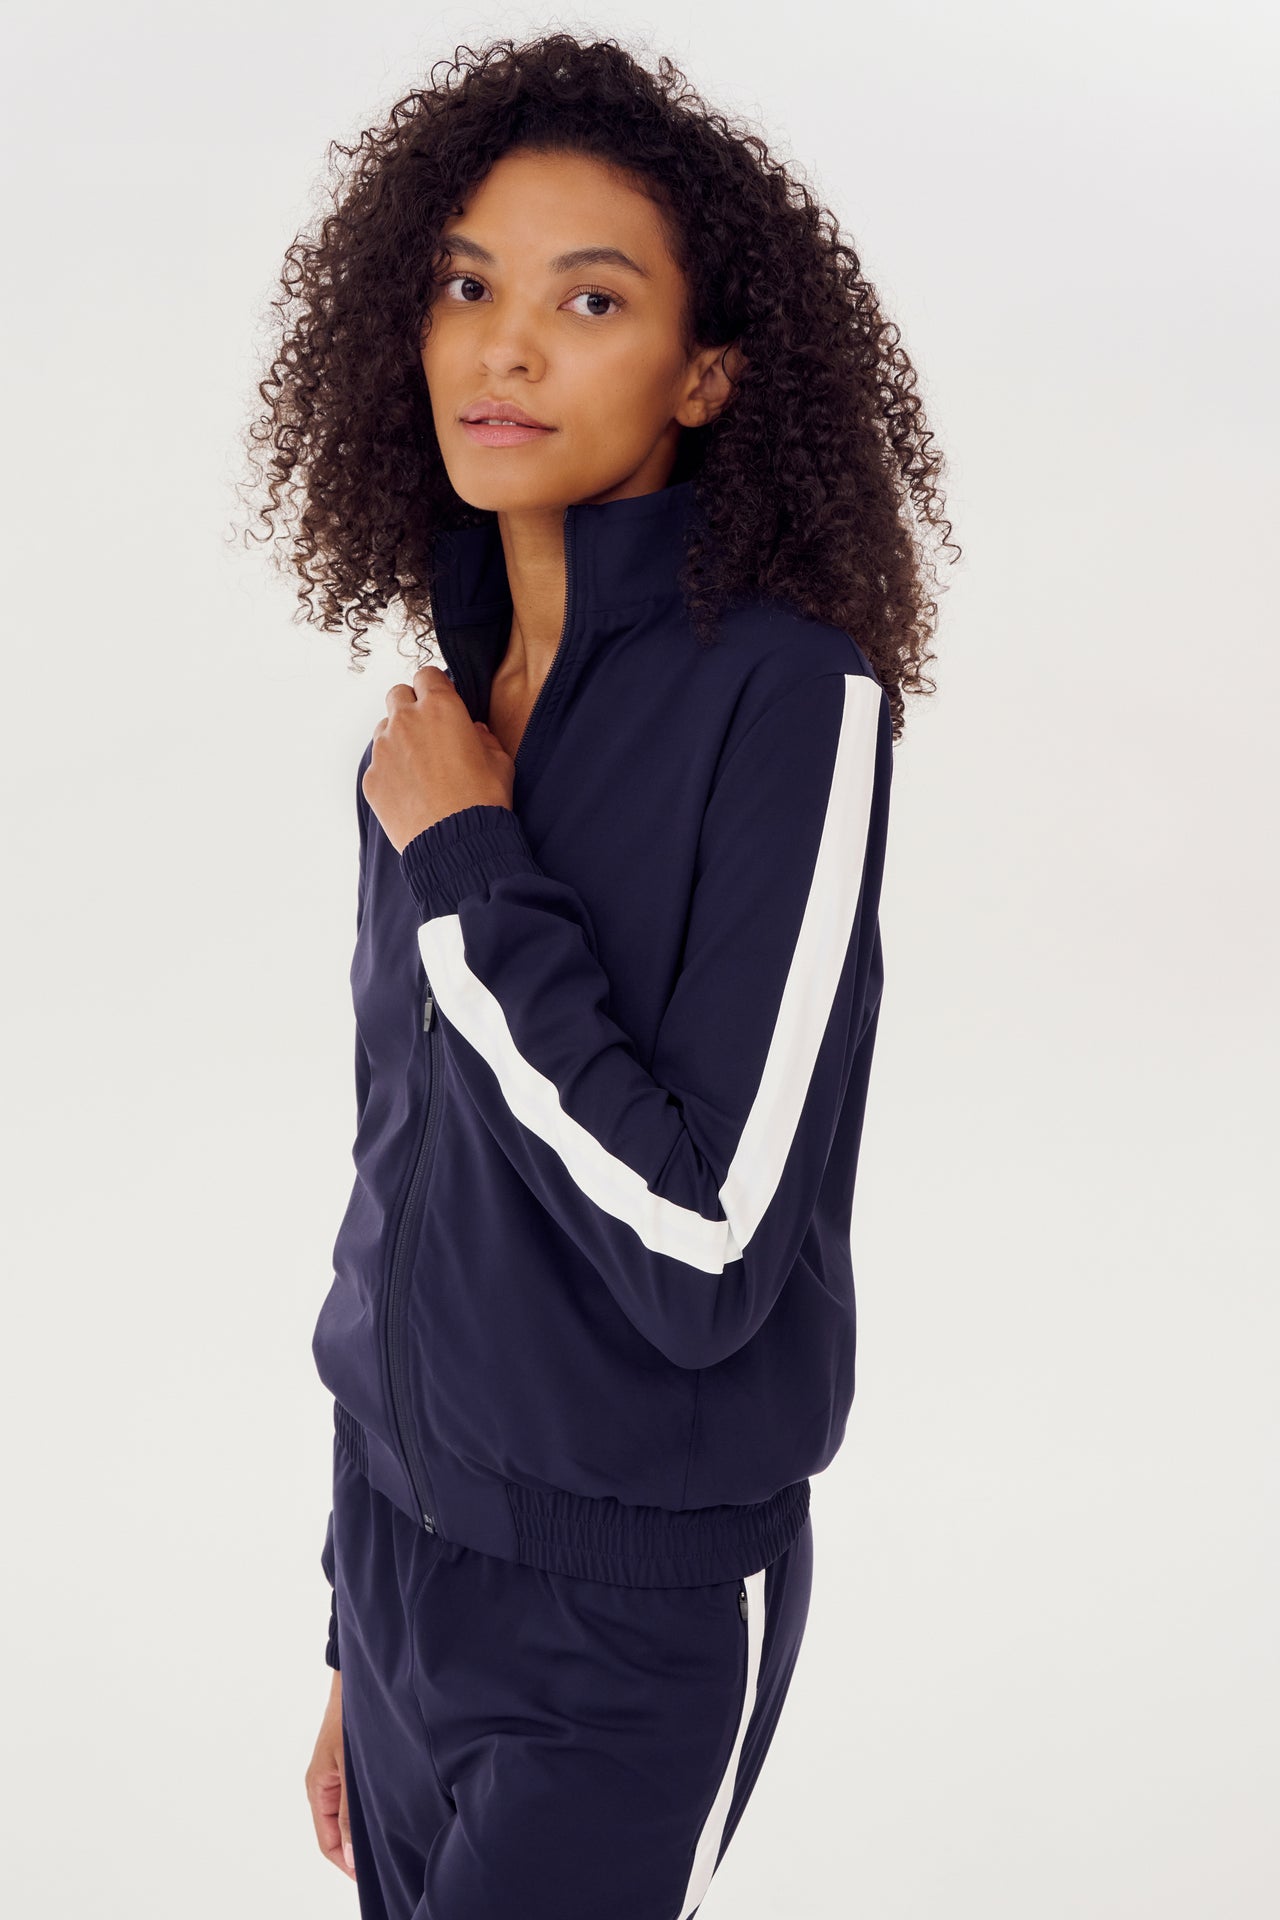 A woman wearing a navy Max Rigor Track Jacket and pants made of SPLITS59 fabric, with white side stripes.